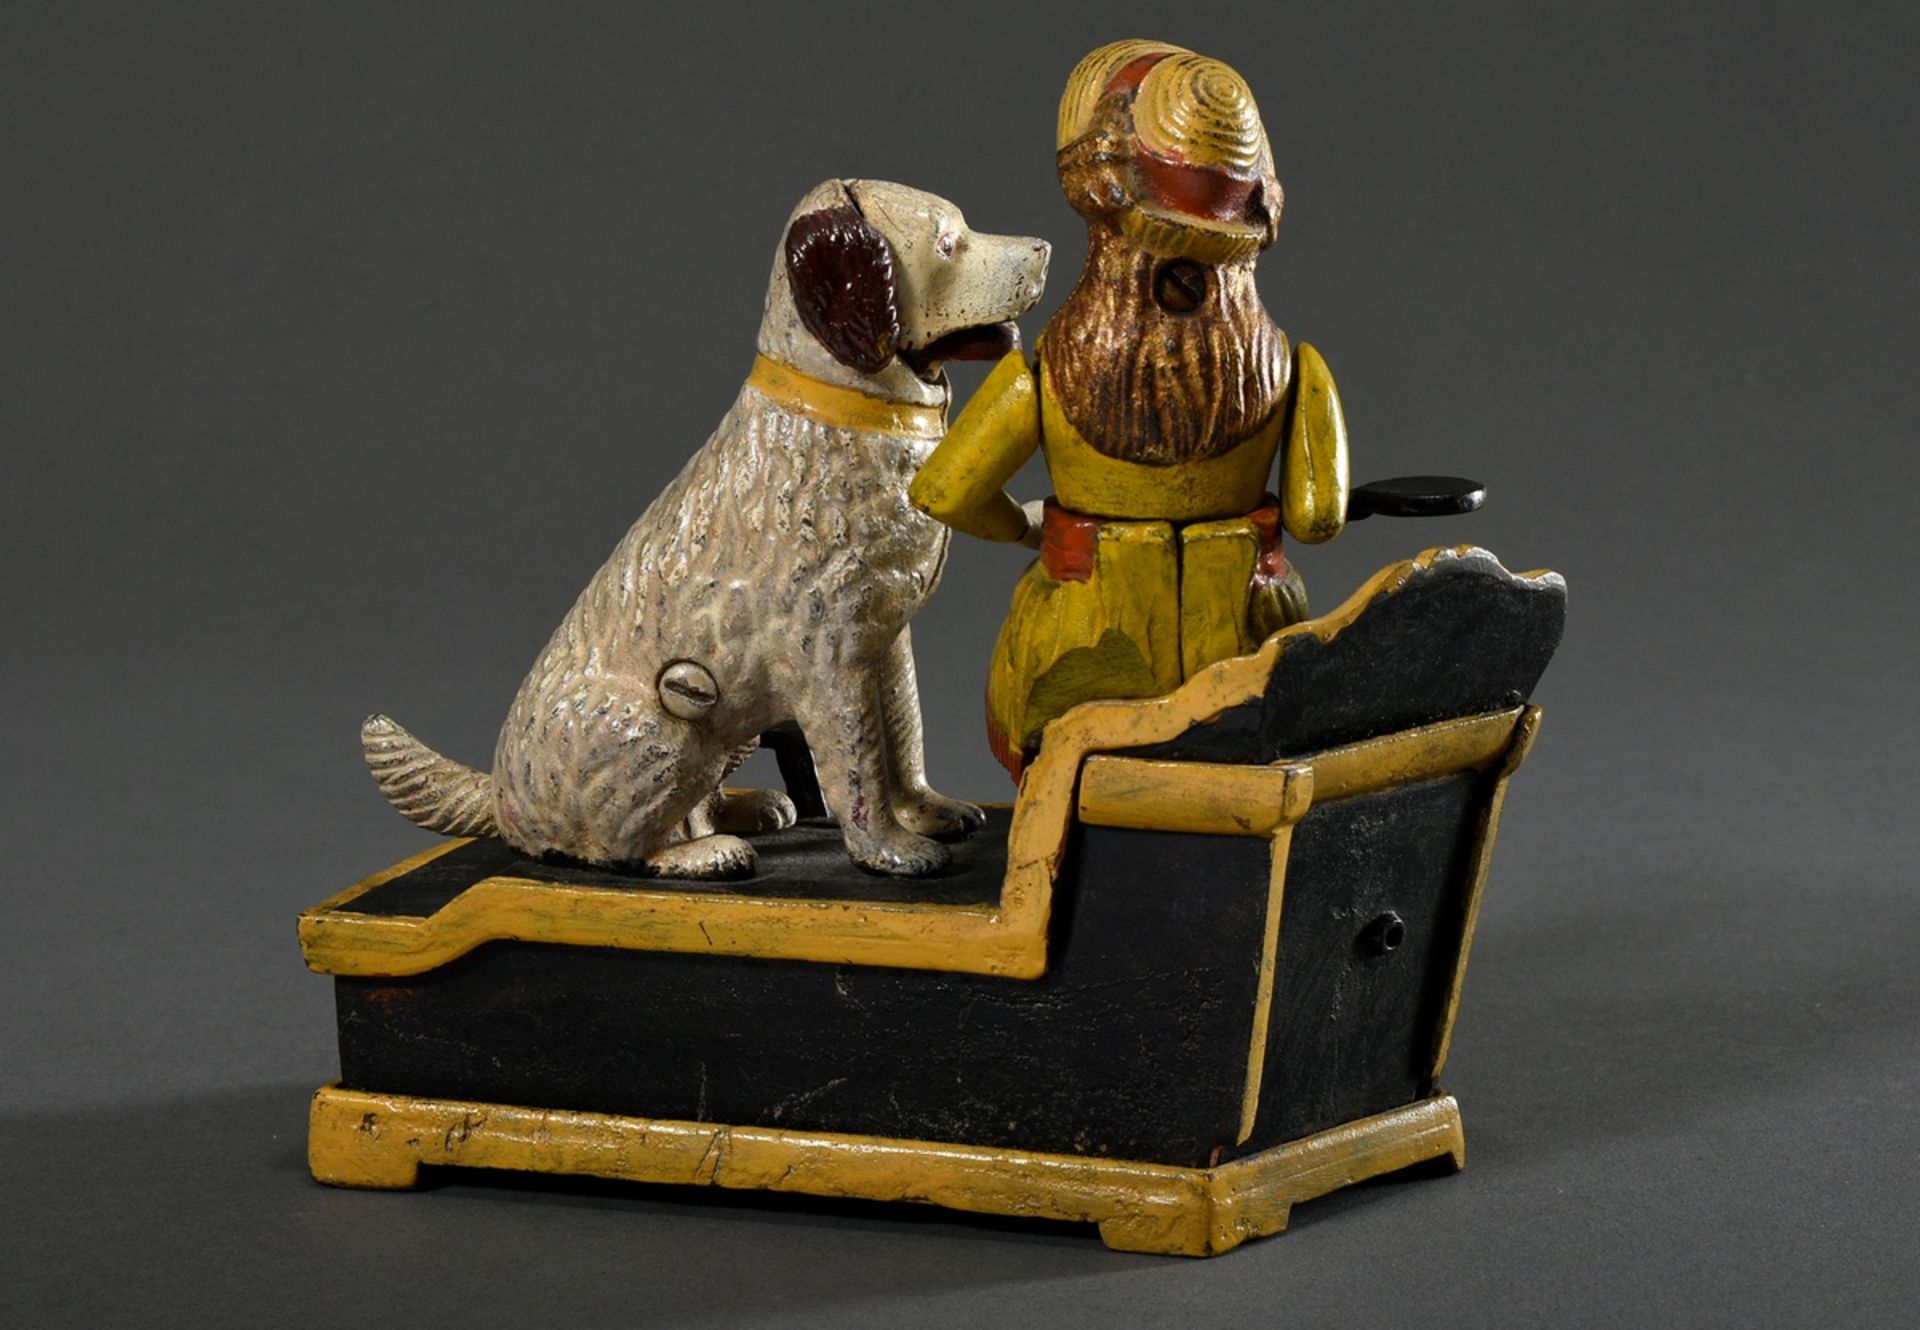 Mechanical bench "Speaking Dog", cast iron, painted, USA, probably 1st half 20th c., 18x19.5x7.8cm, - Image 5 of 6